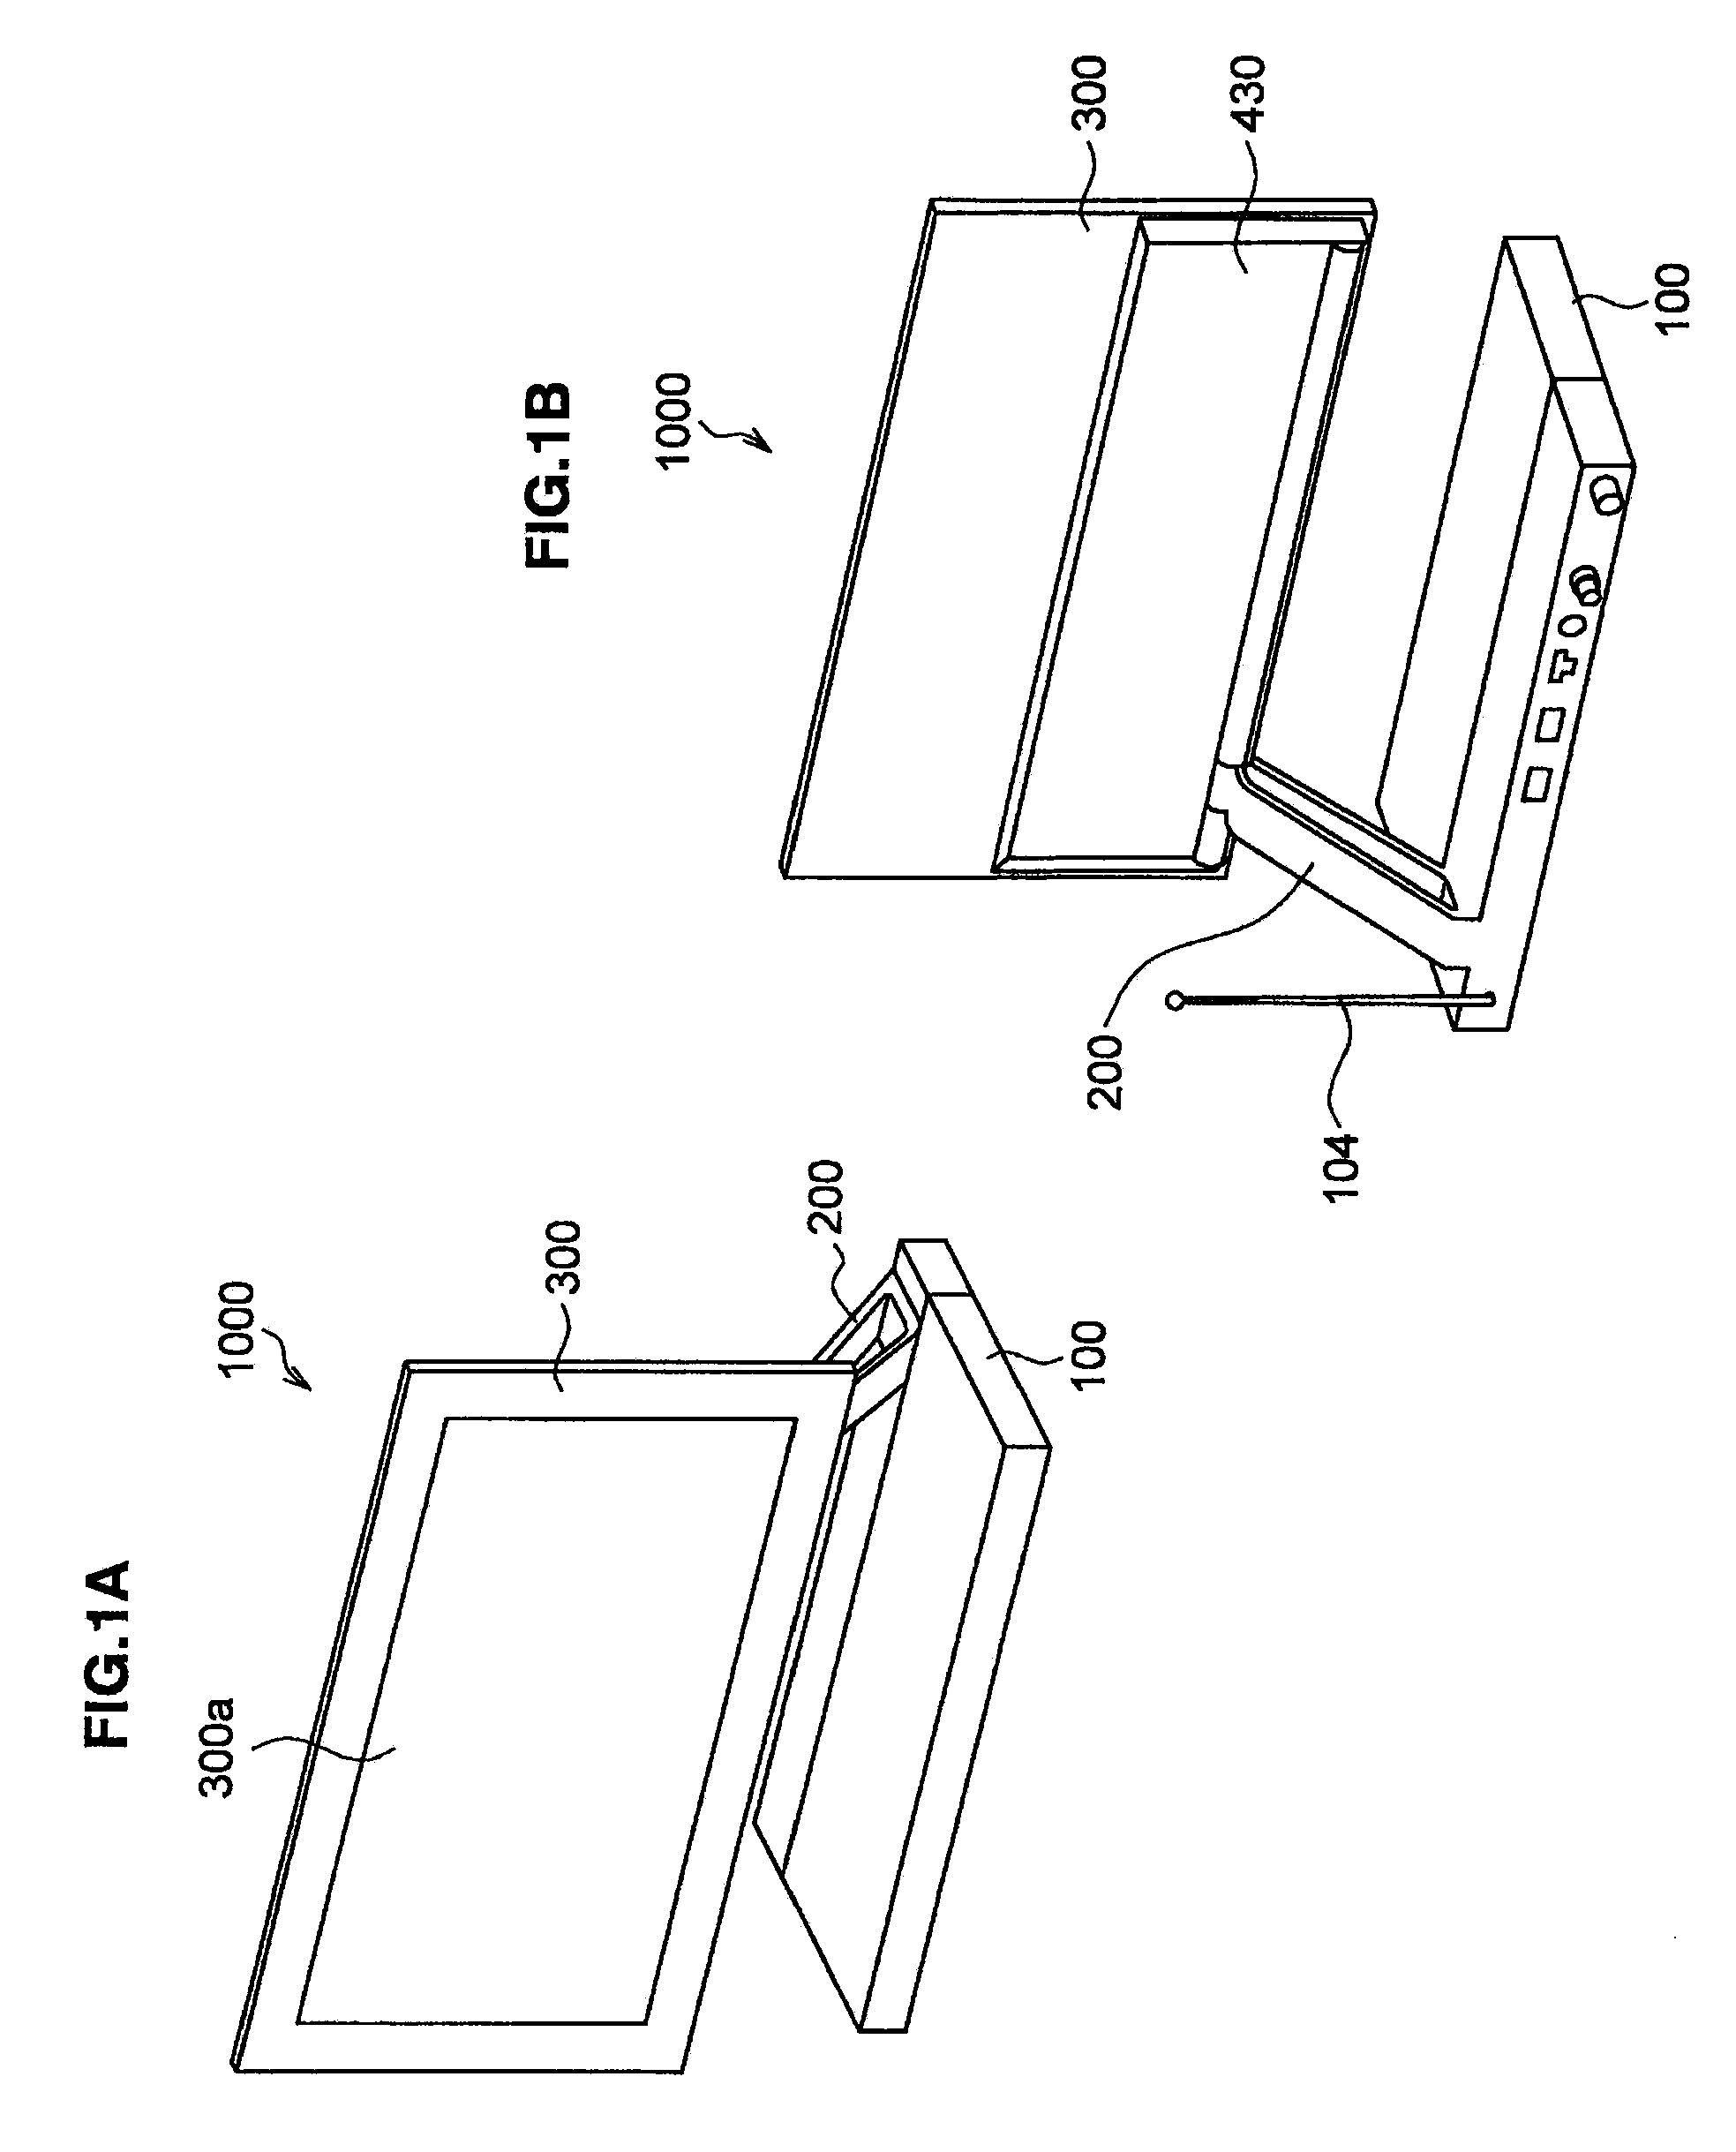 Display device having cantilevered display unit